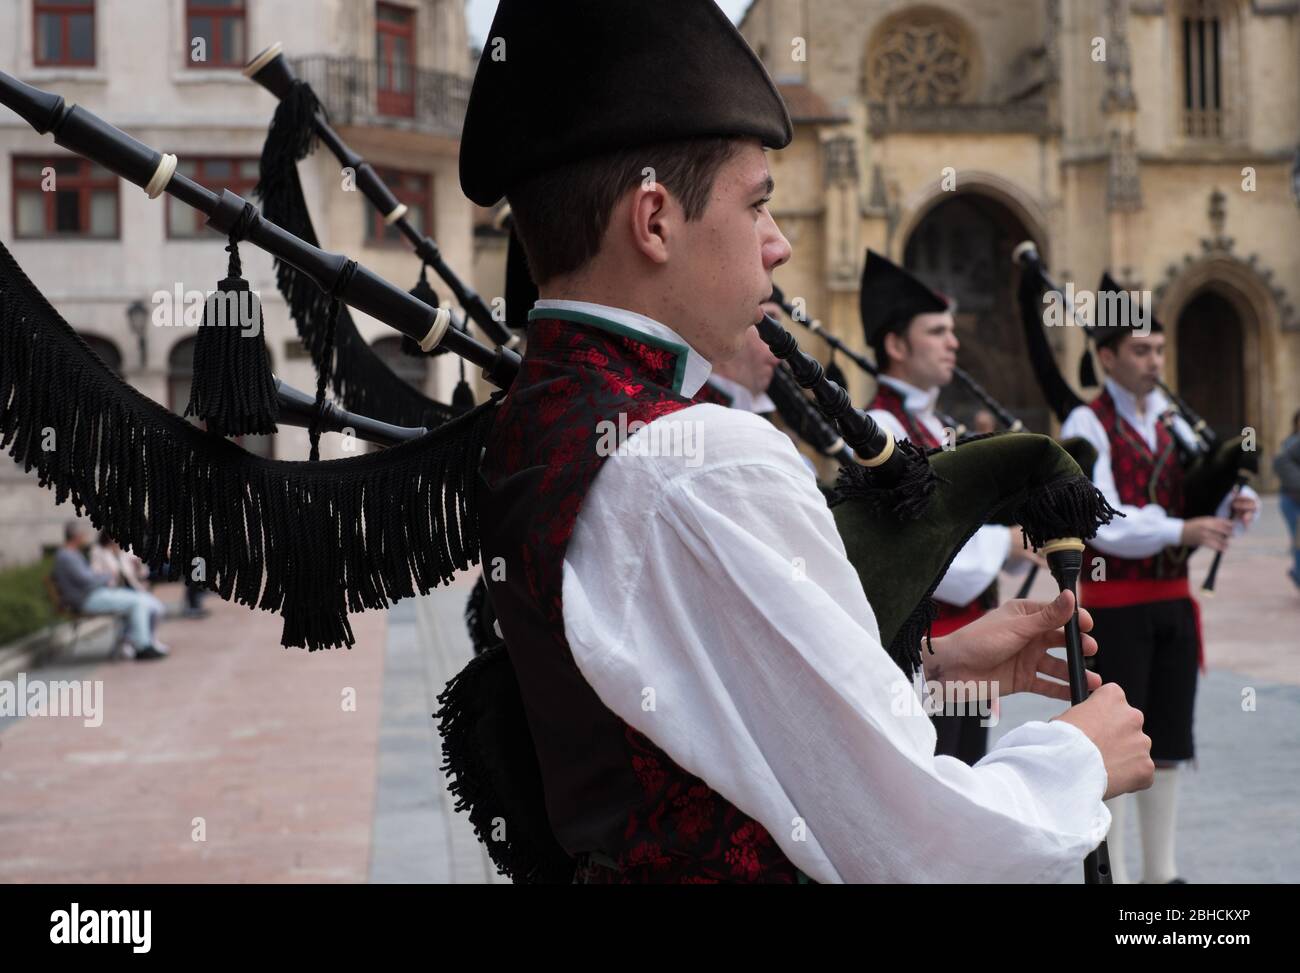 Asturian bagpipe band in traditional dress in Oviedo, Asturias, northern Spain Stock Photo